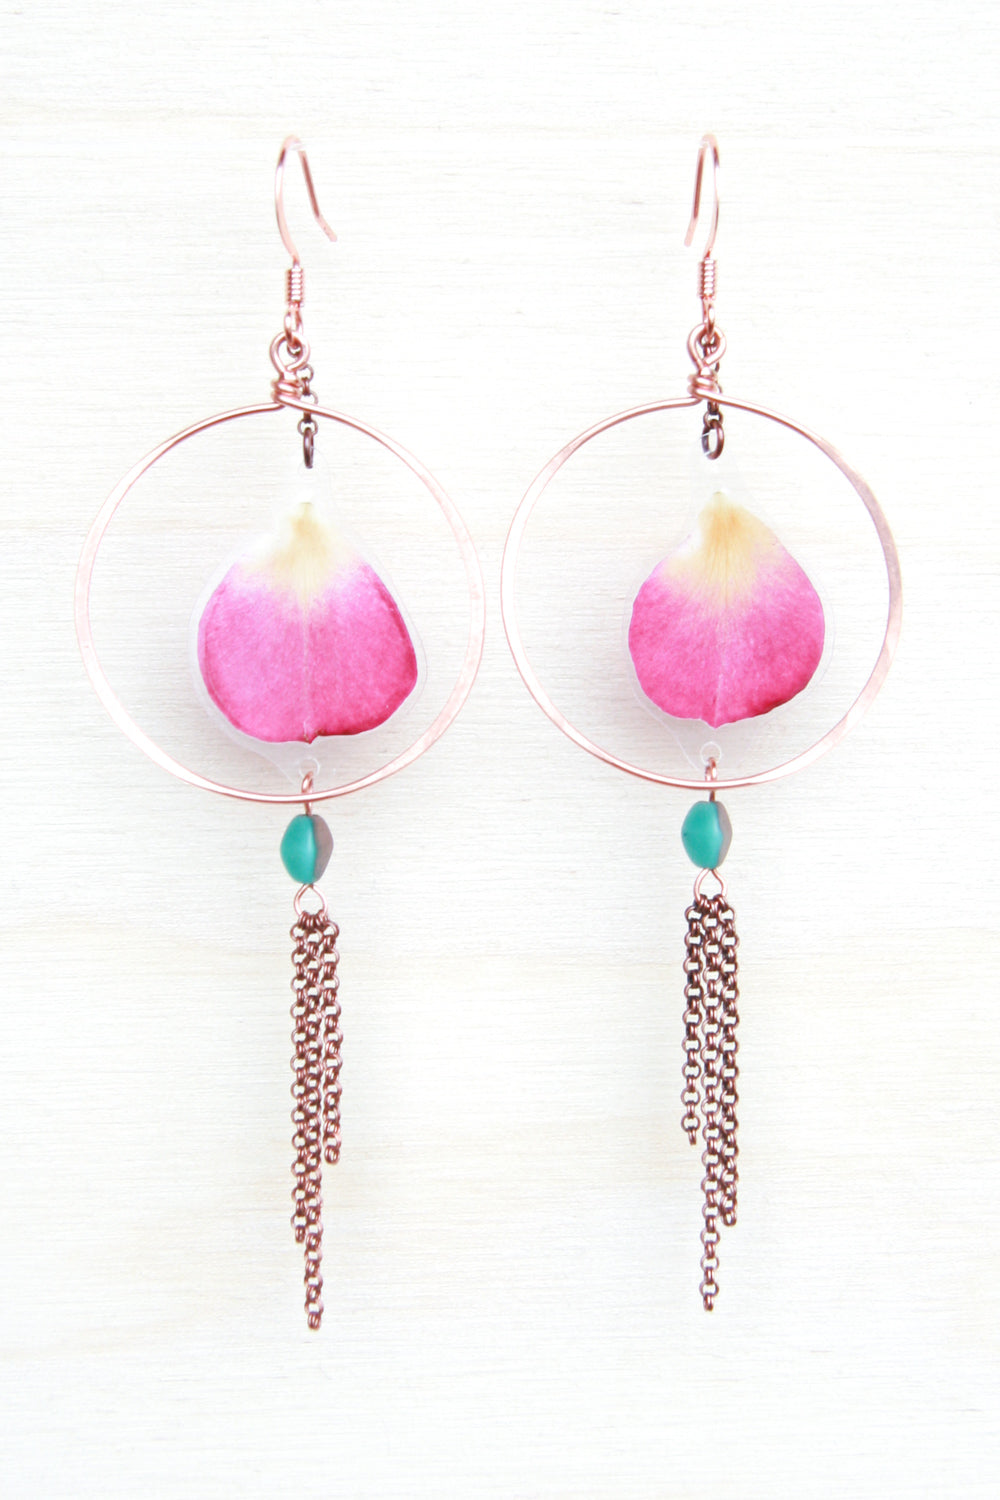 Pink Rose Pressed Flower Earrings with Hammered Copper Hoops, Turquoise Glass & Double Rolo Dangles